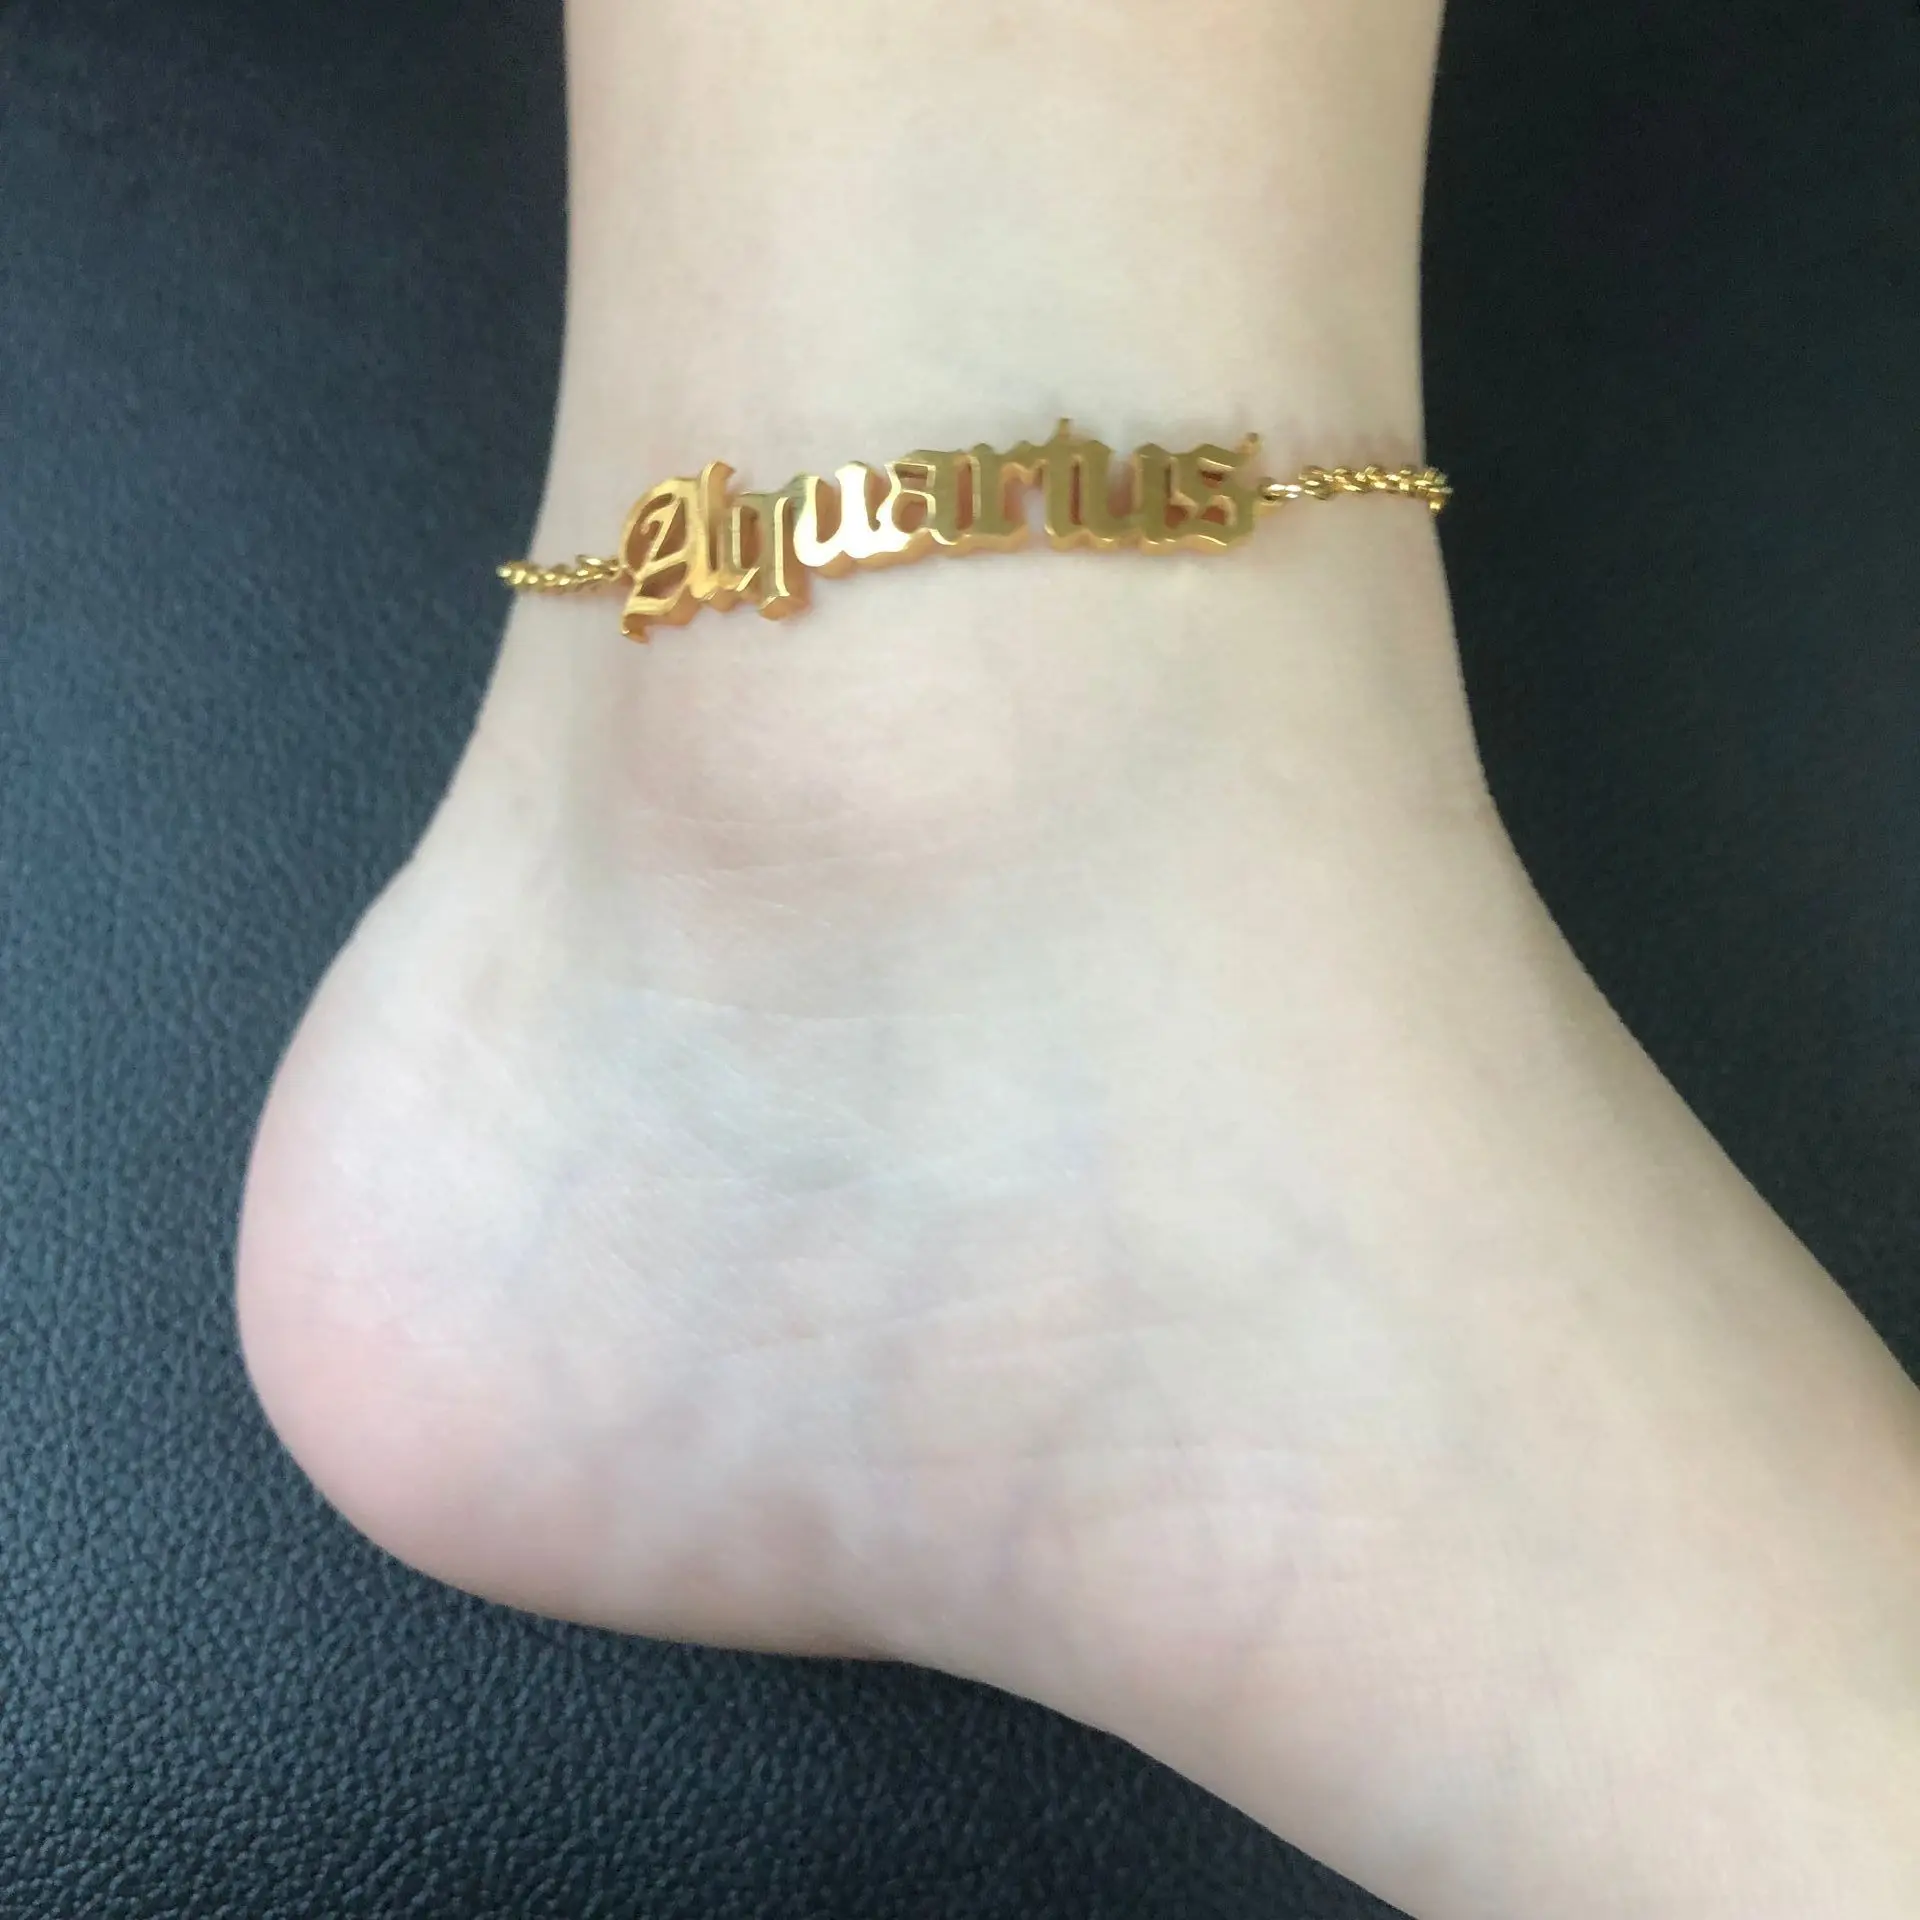 

Zodiac 12 Constellations Anklets Bracelet For Women Stainless Steel Gold Color Letter Cancel Anklet Boho Barefoot Foot Jewelry